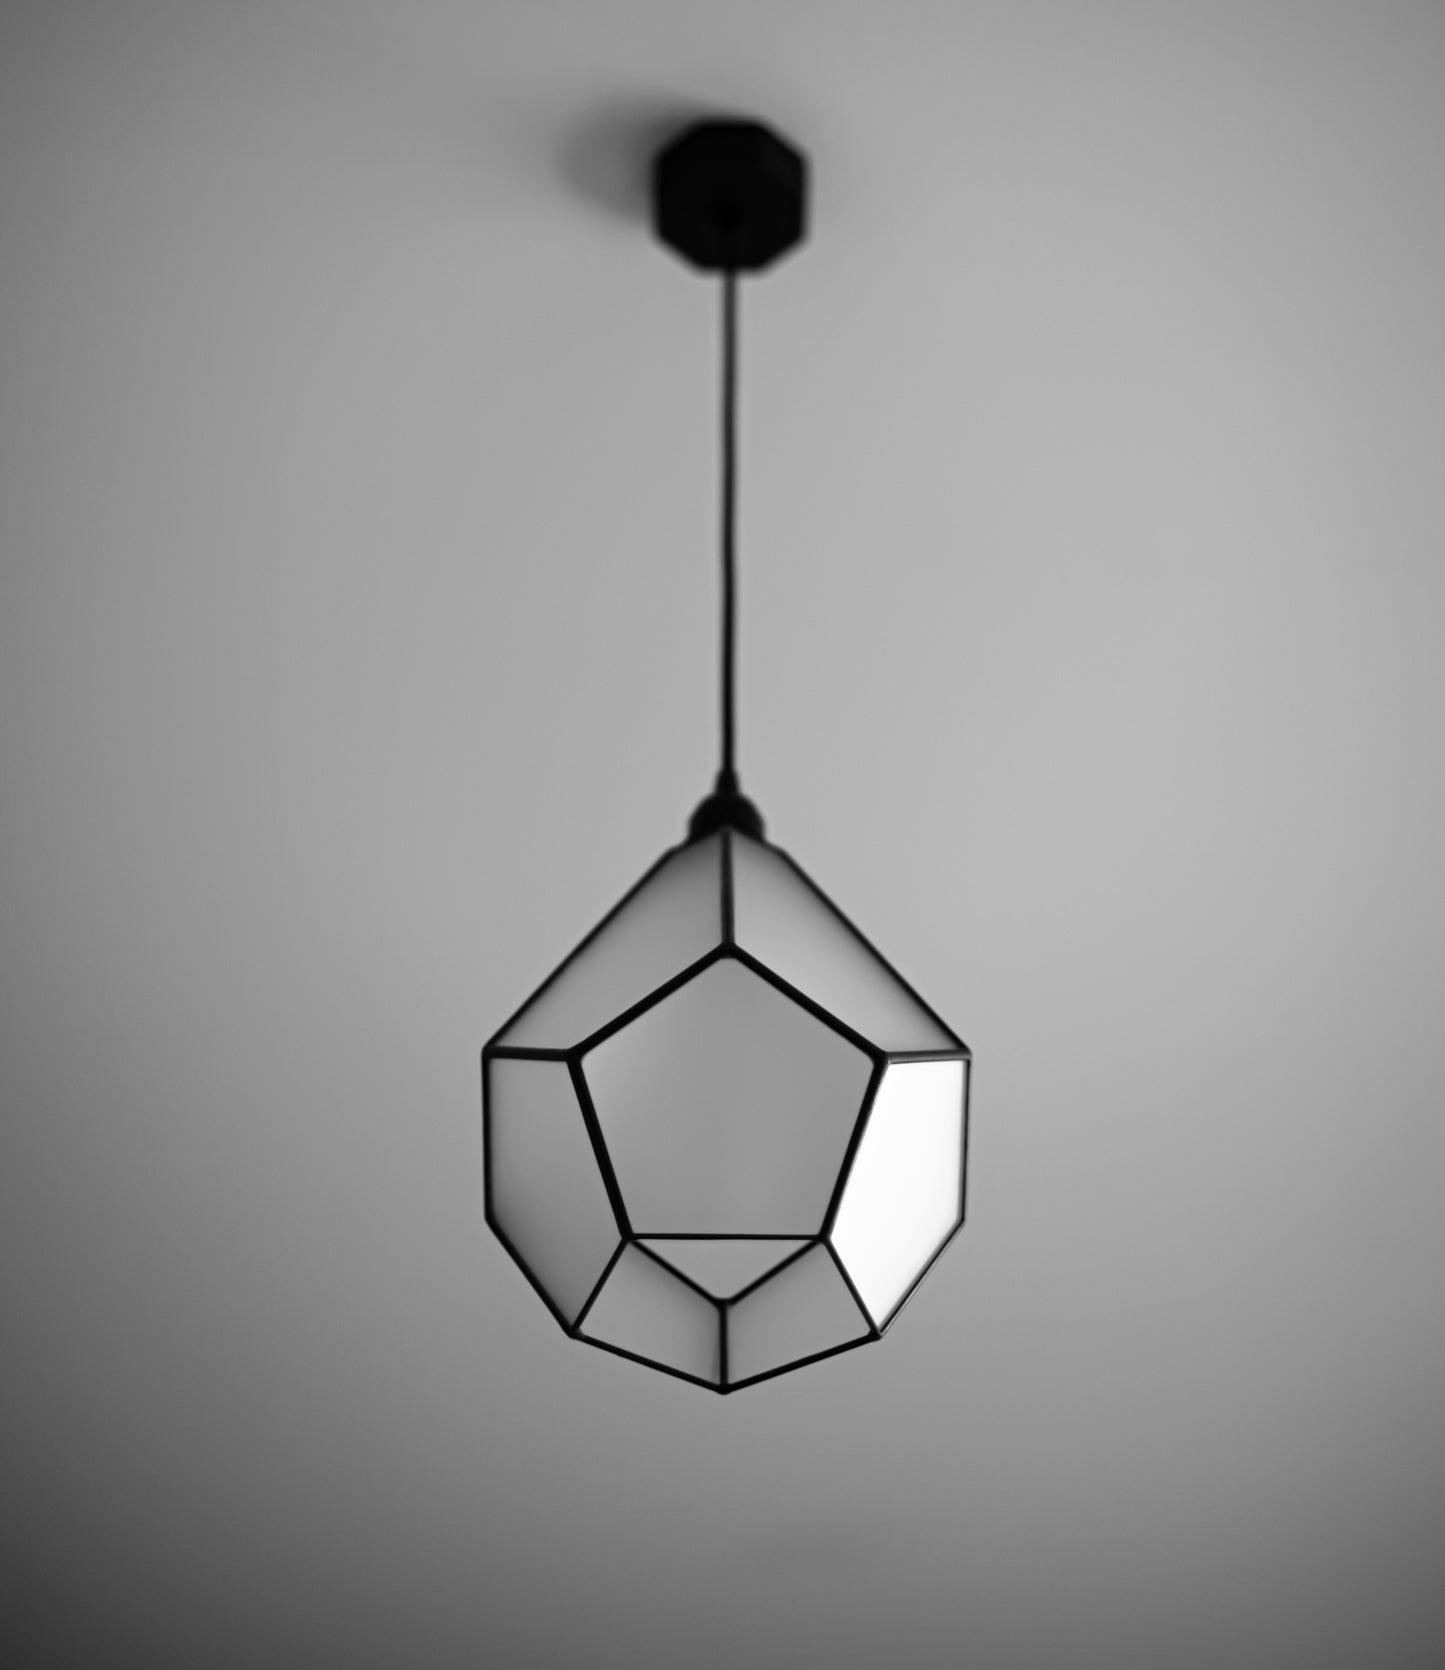 Pointed Dodecahedron Geometric Matt Glass Chandelier